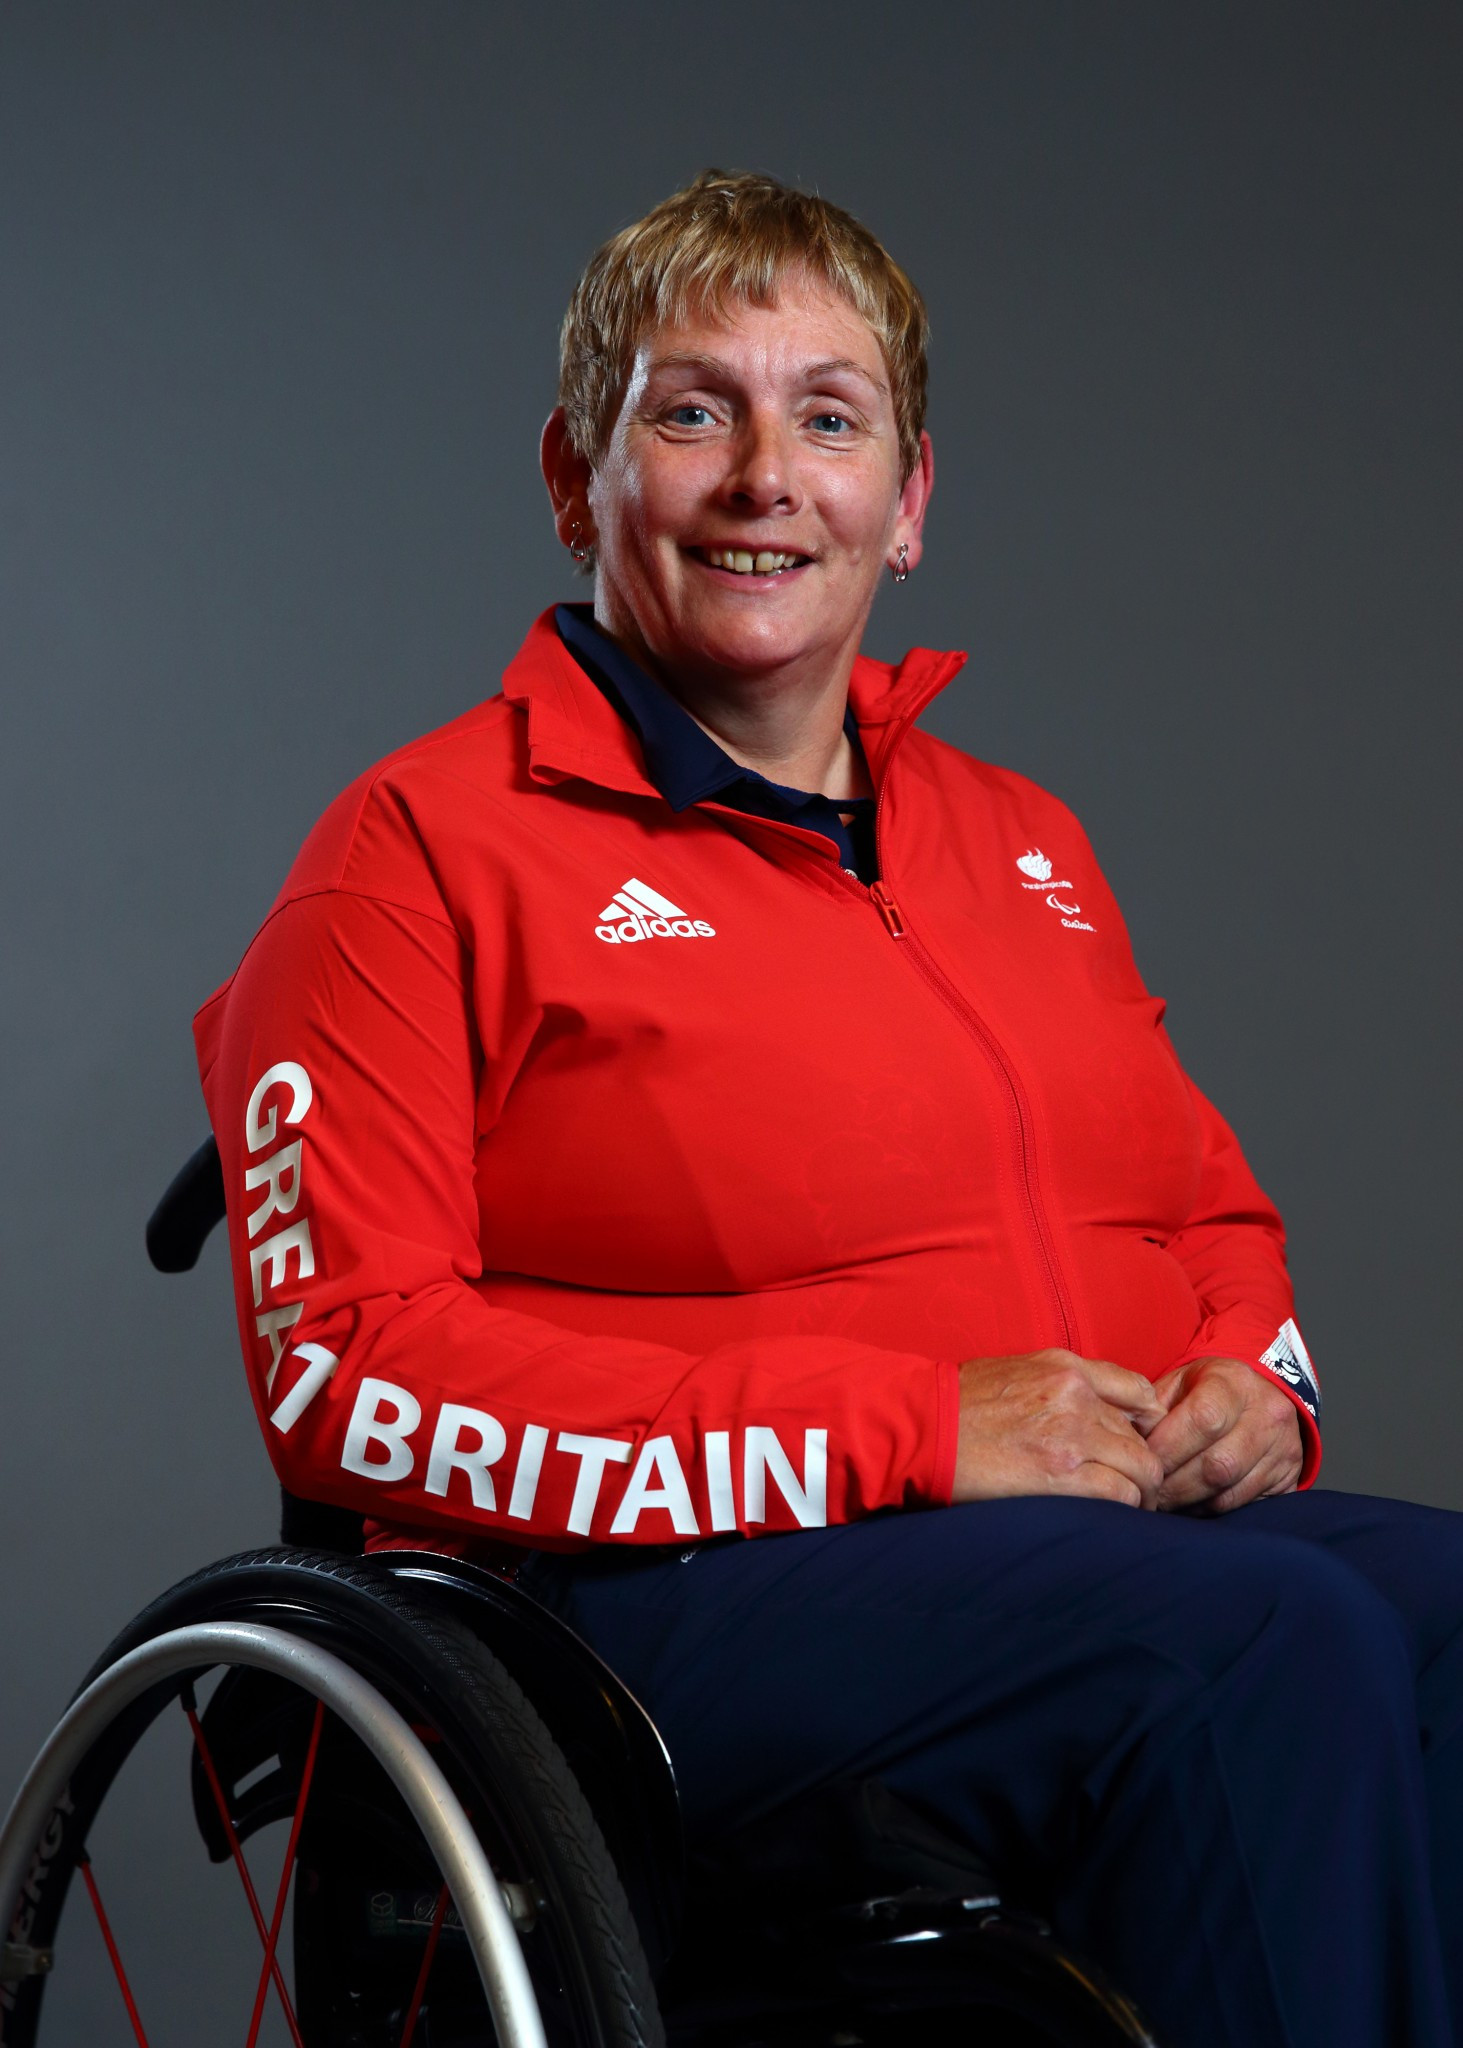 Britain's three Paralympic archery gold medallists set for Beijing World Championships